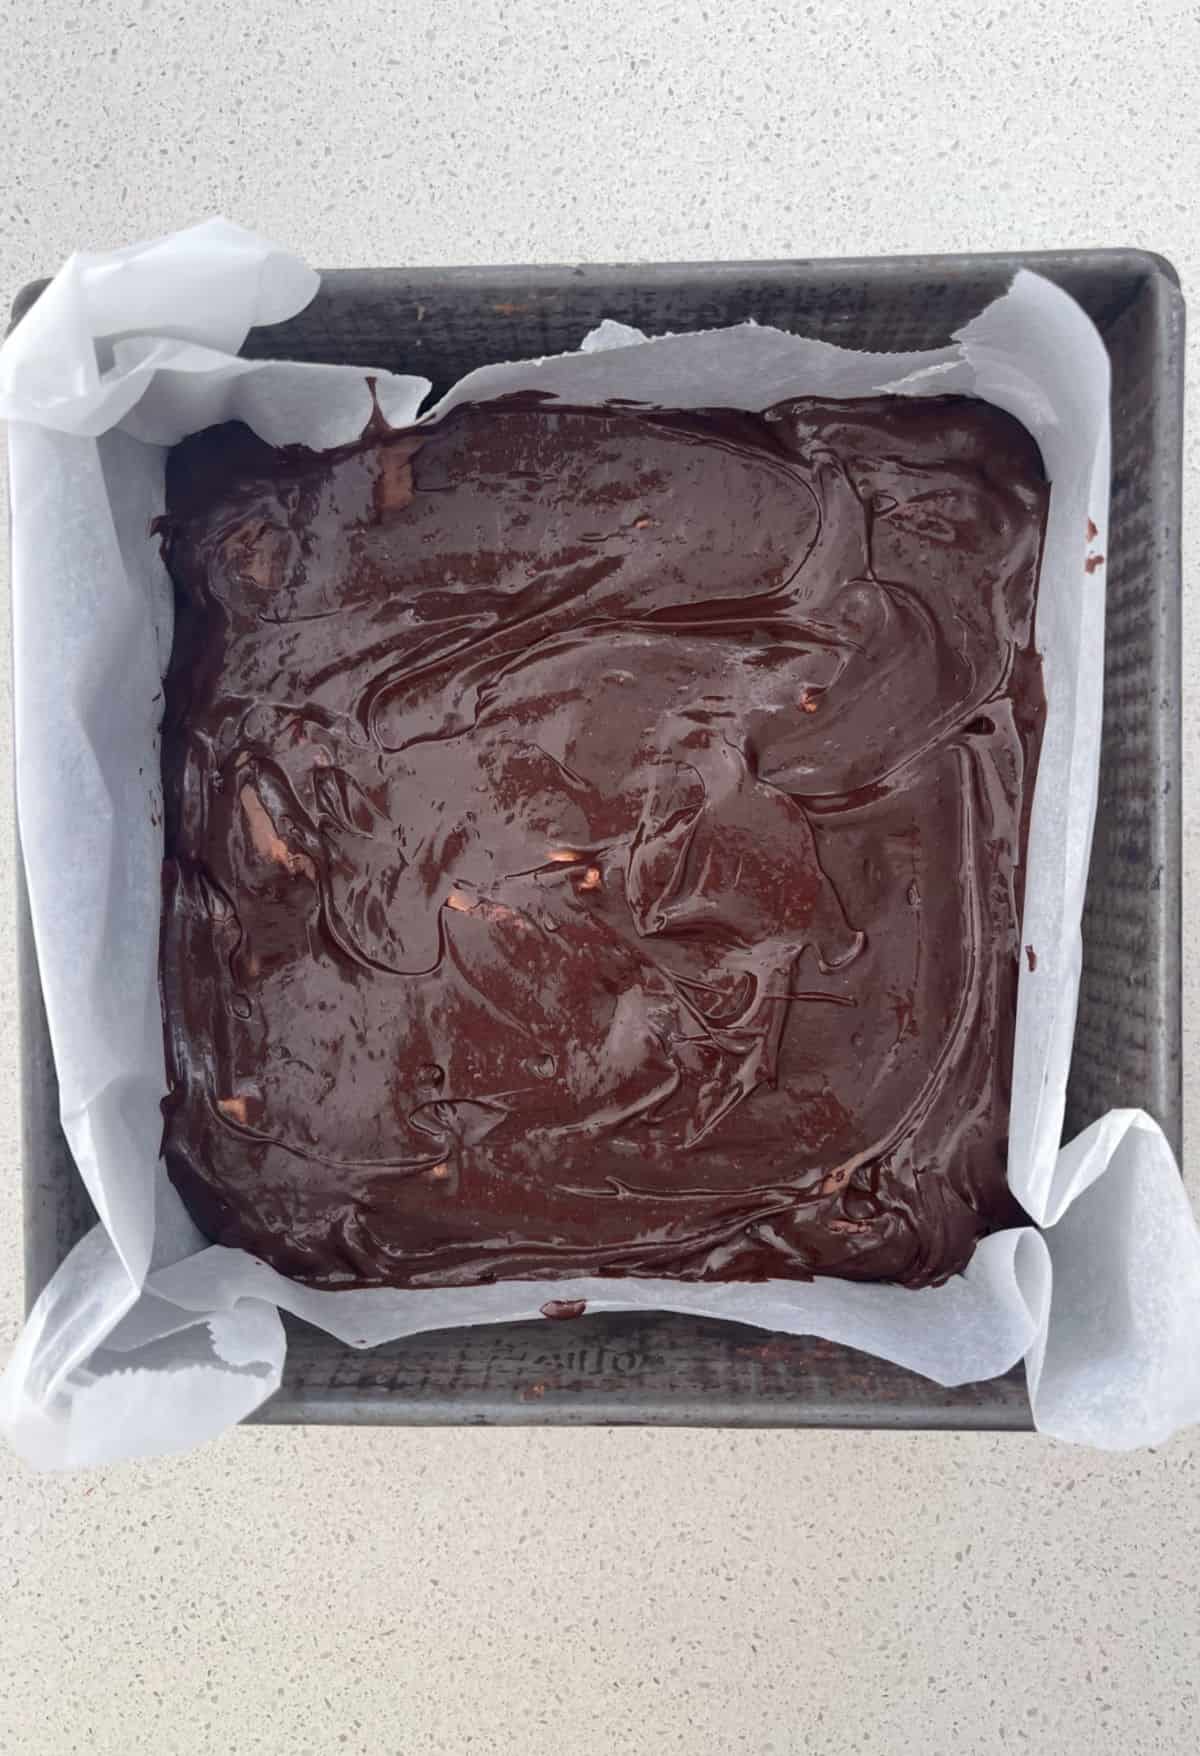 Mars Bar Brownie mixture in a baking dish lined with baking paper.